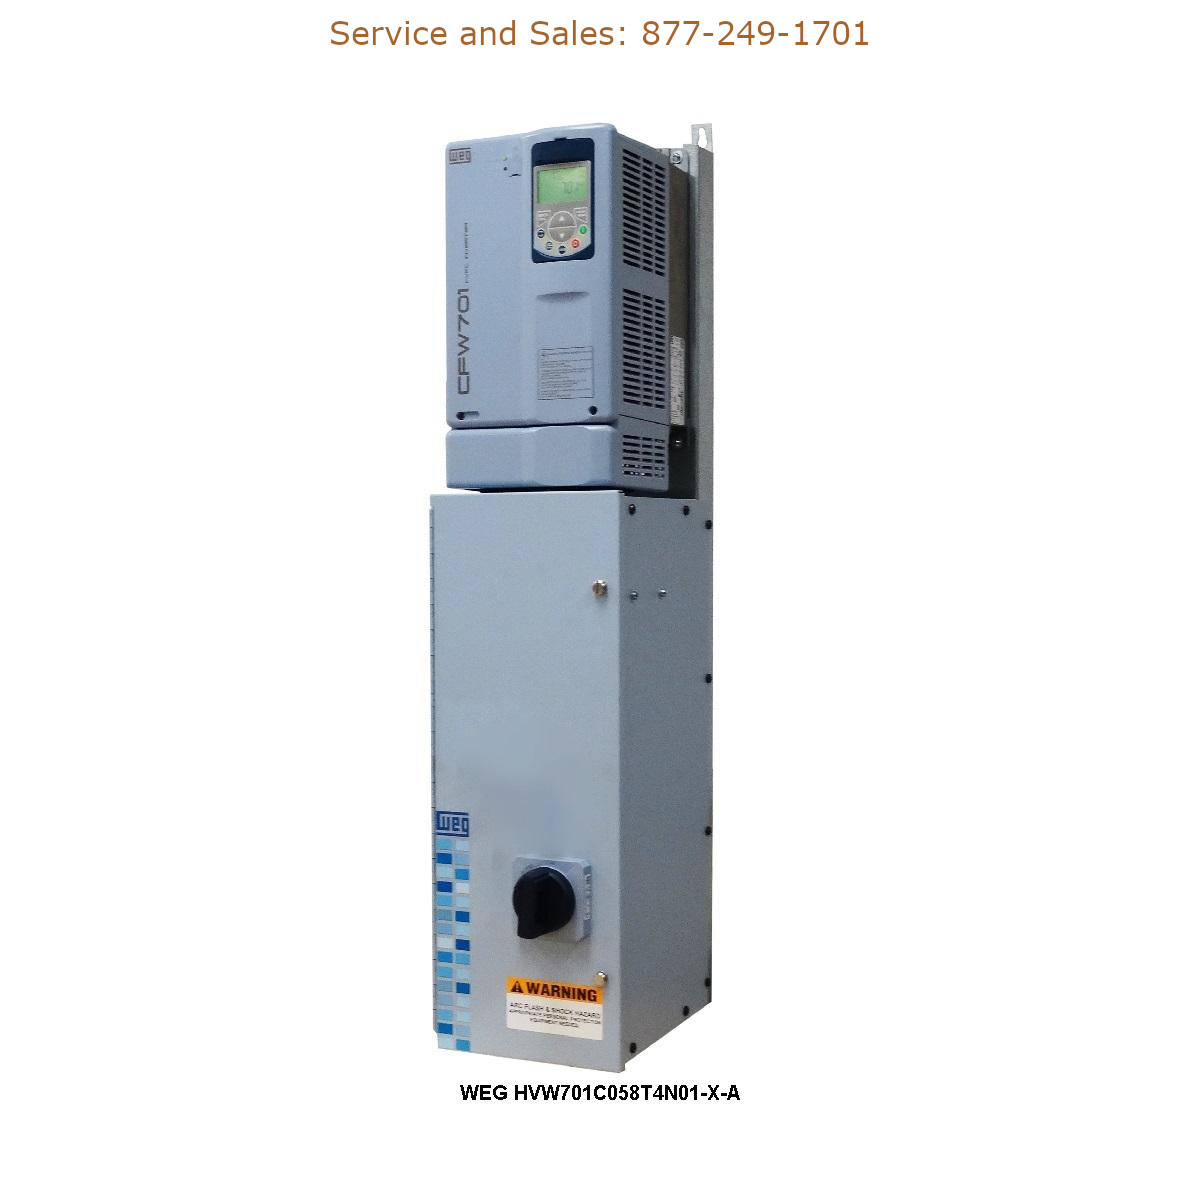 WEG HVW701C058T4N01-X-A WEG Model Number HVW701C058T4N01-X-A WEG Drives, Variable Speed Drives Repair Service, Troubleshooting, Replacement Parts https://gesrepair.com/wp-content/uploads/2022/WEG/WEG_HVW701C058T4N01-X-A_Drives_Variable_Speed_Drives.jpg